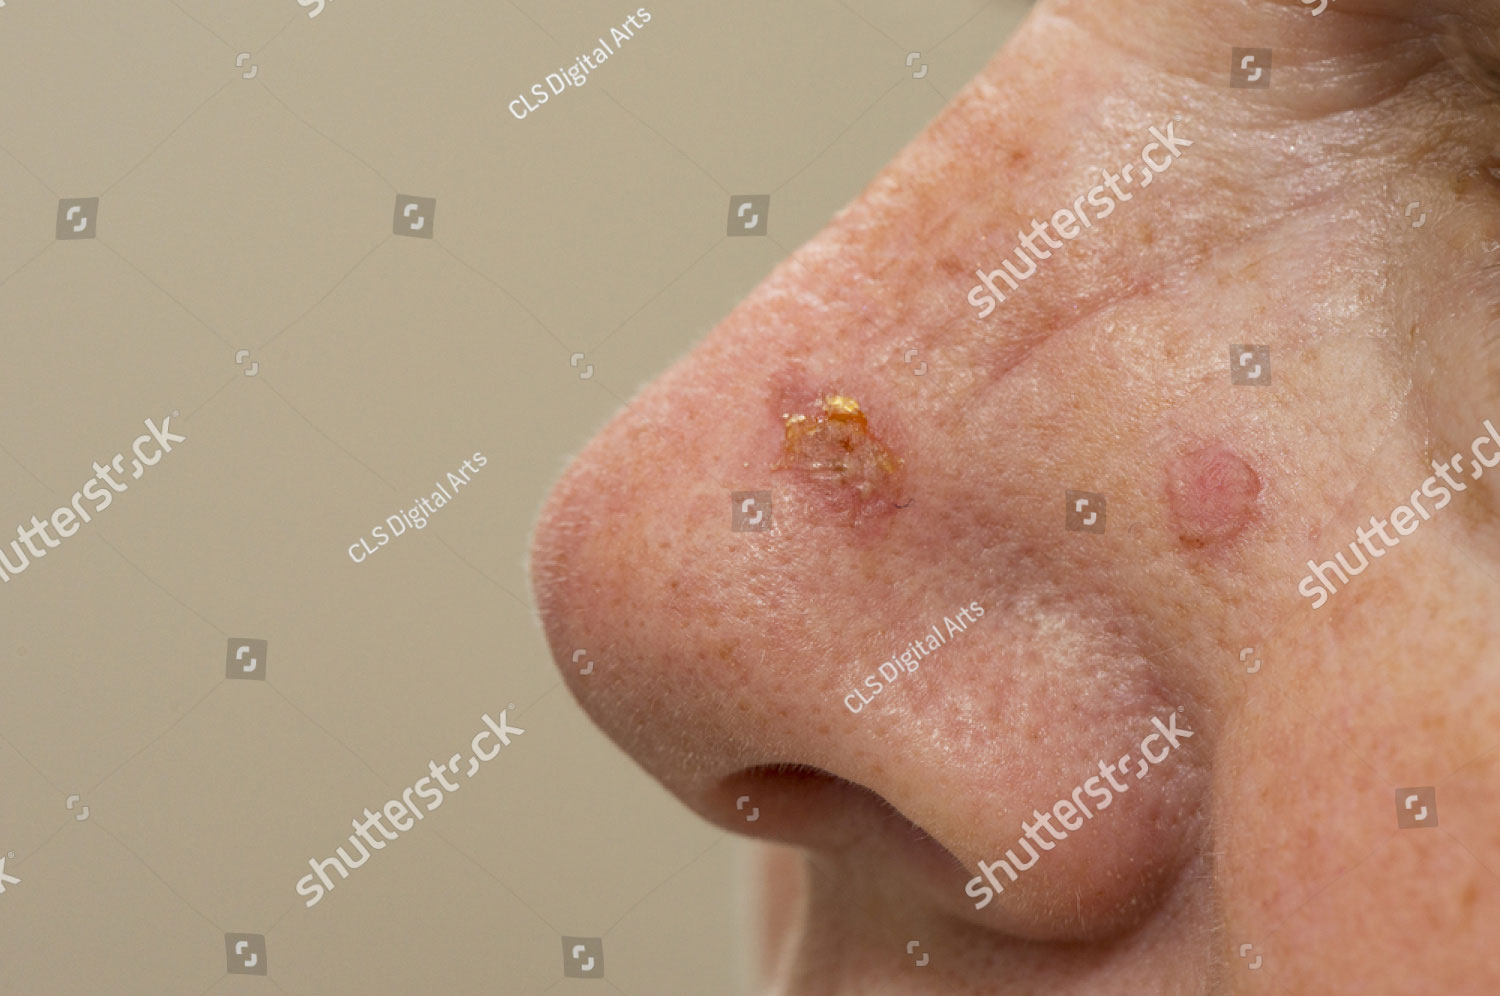 Sunspots On A Nose That Have Been Treated With Cryosurgery 441847699